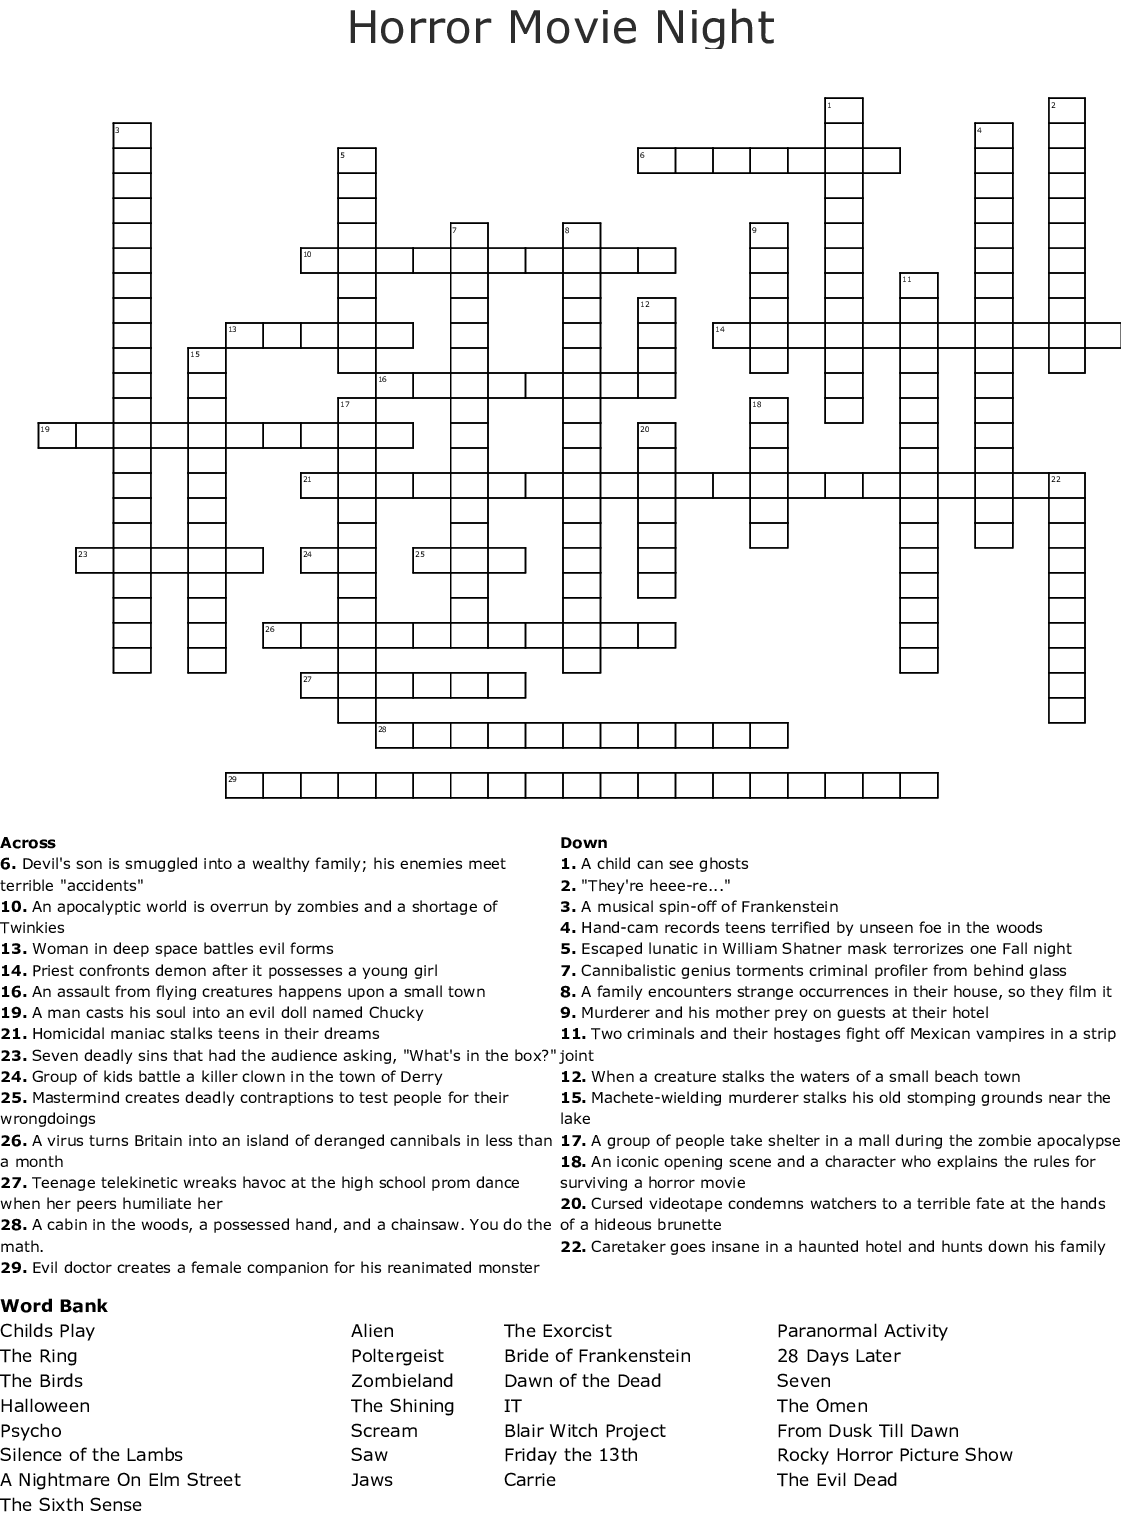 Movies Crossword Printable Pin On Word Search The Answers To The 